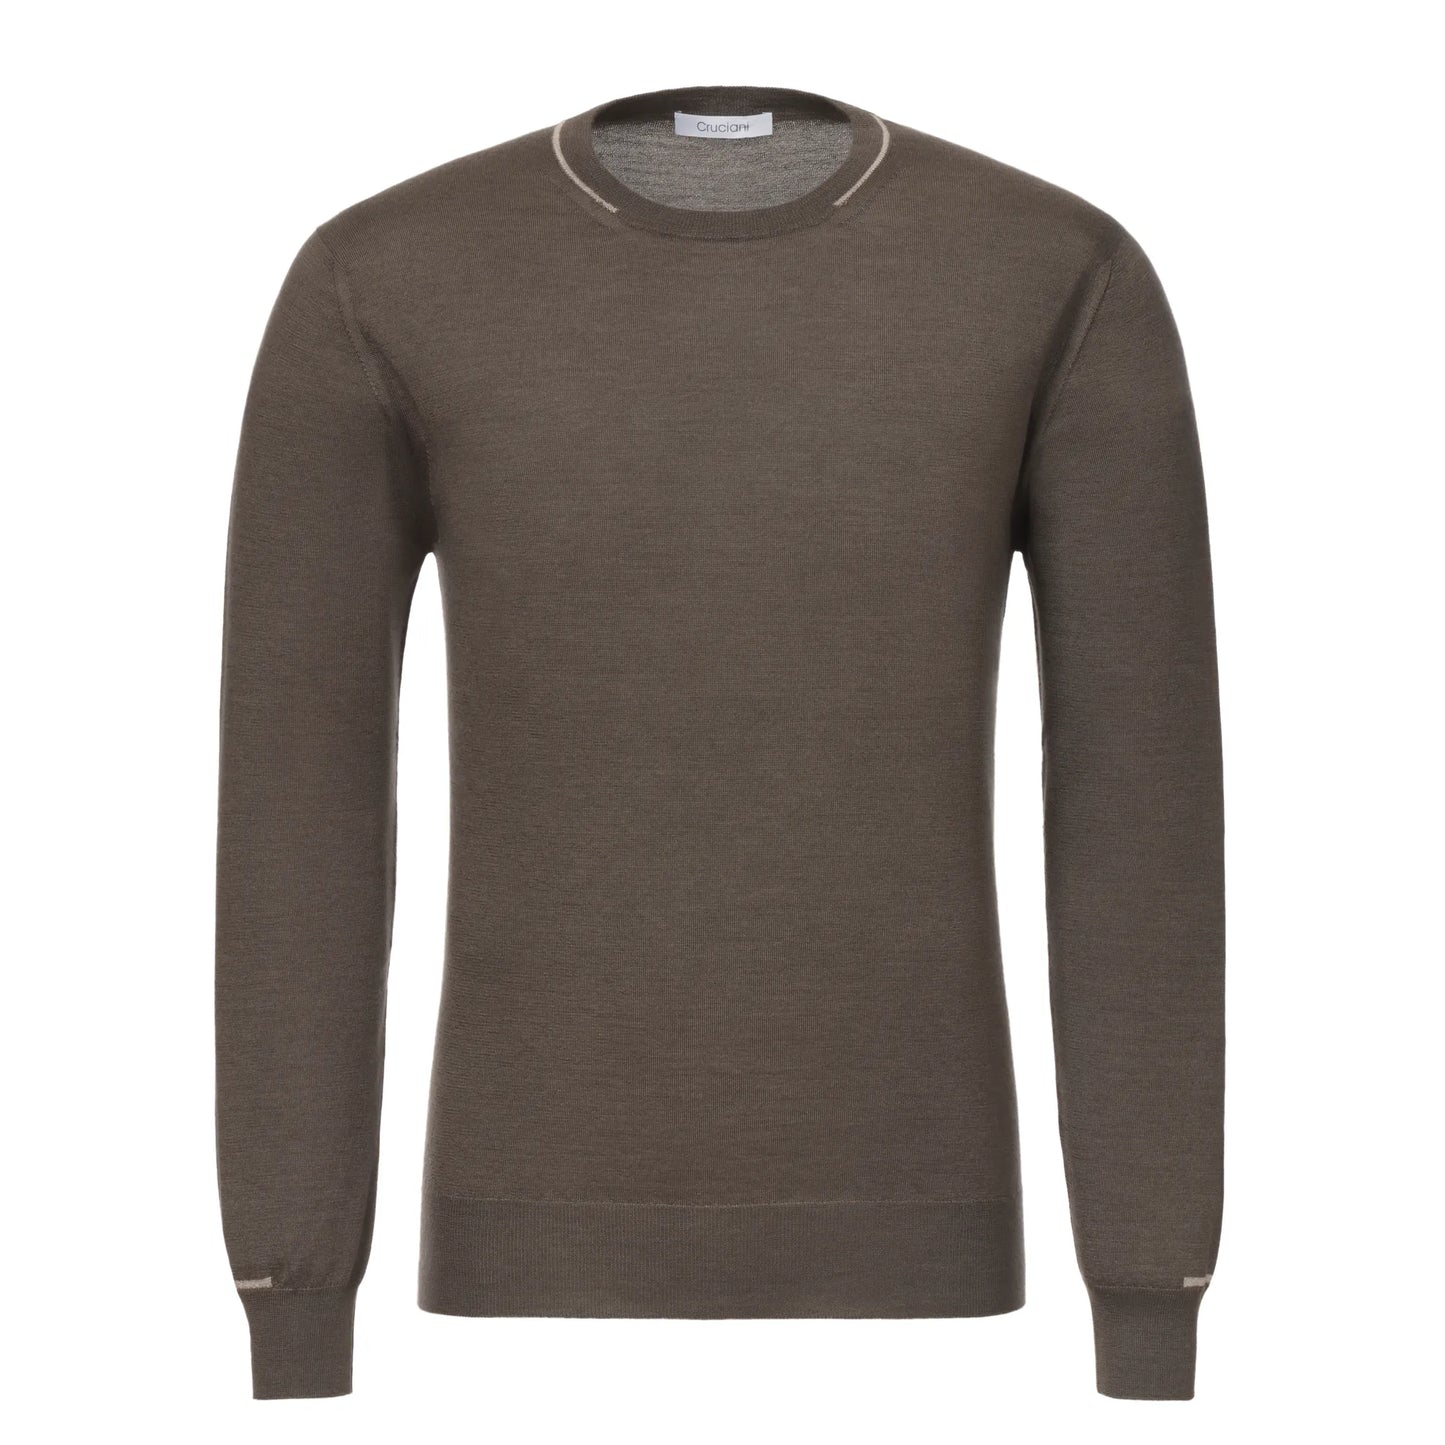 Cashmere Blend Sweater in Earth Brown with White Details